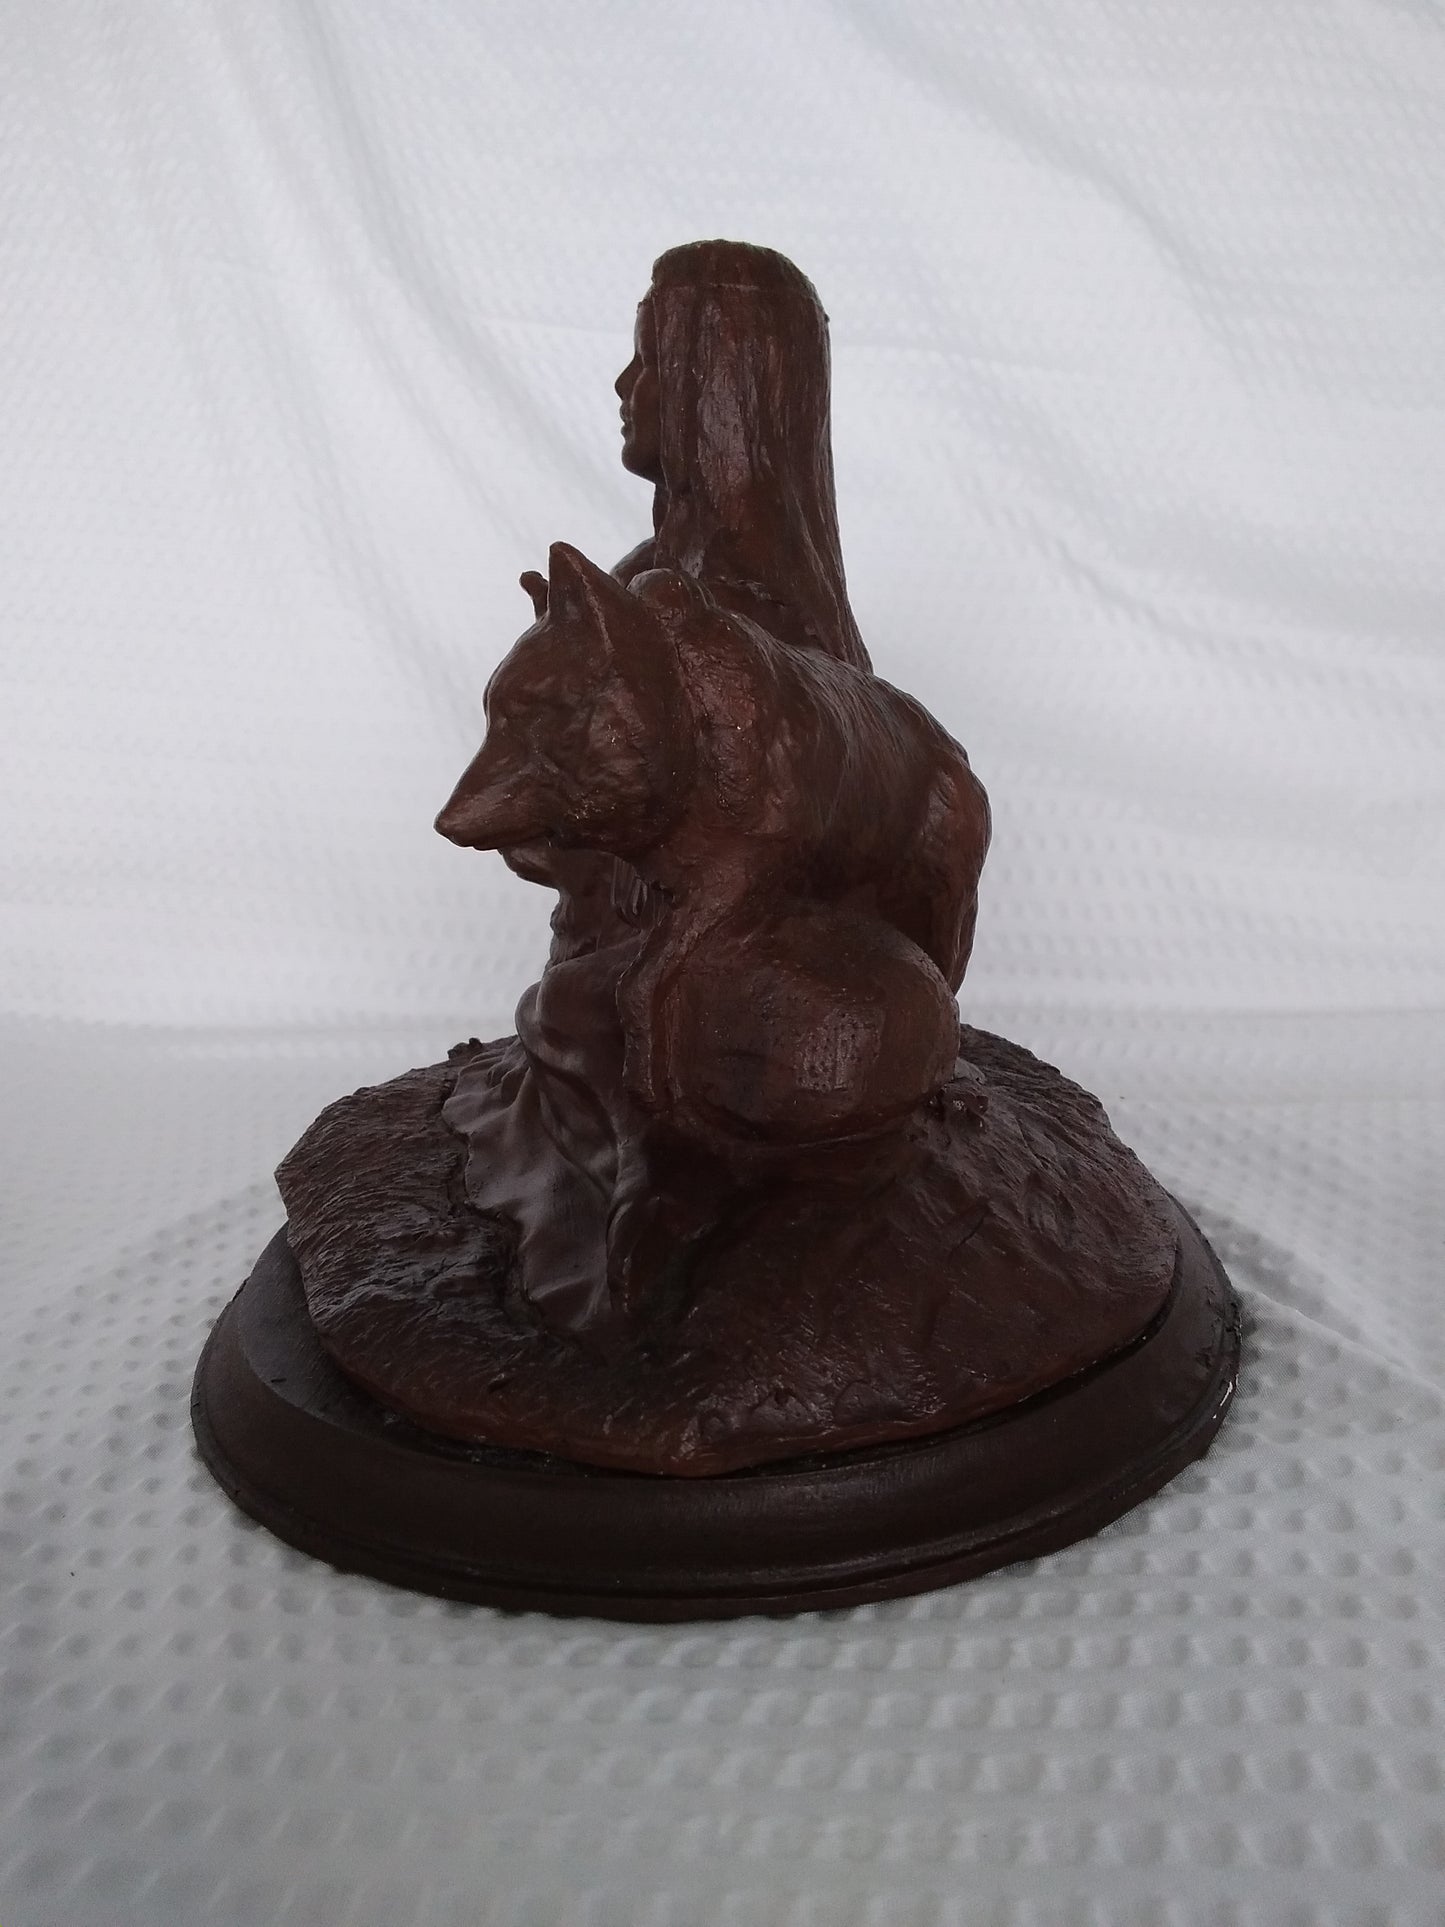 N.C. Artist "Lady of the Wolves" Figurine - Initialed and Dated by Artist